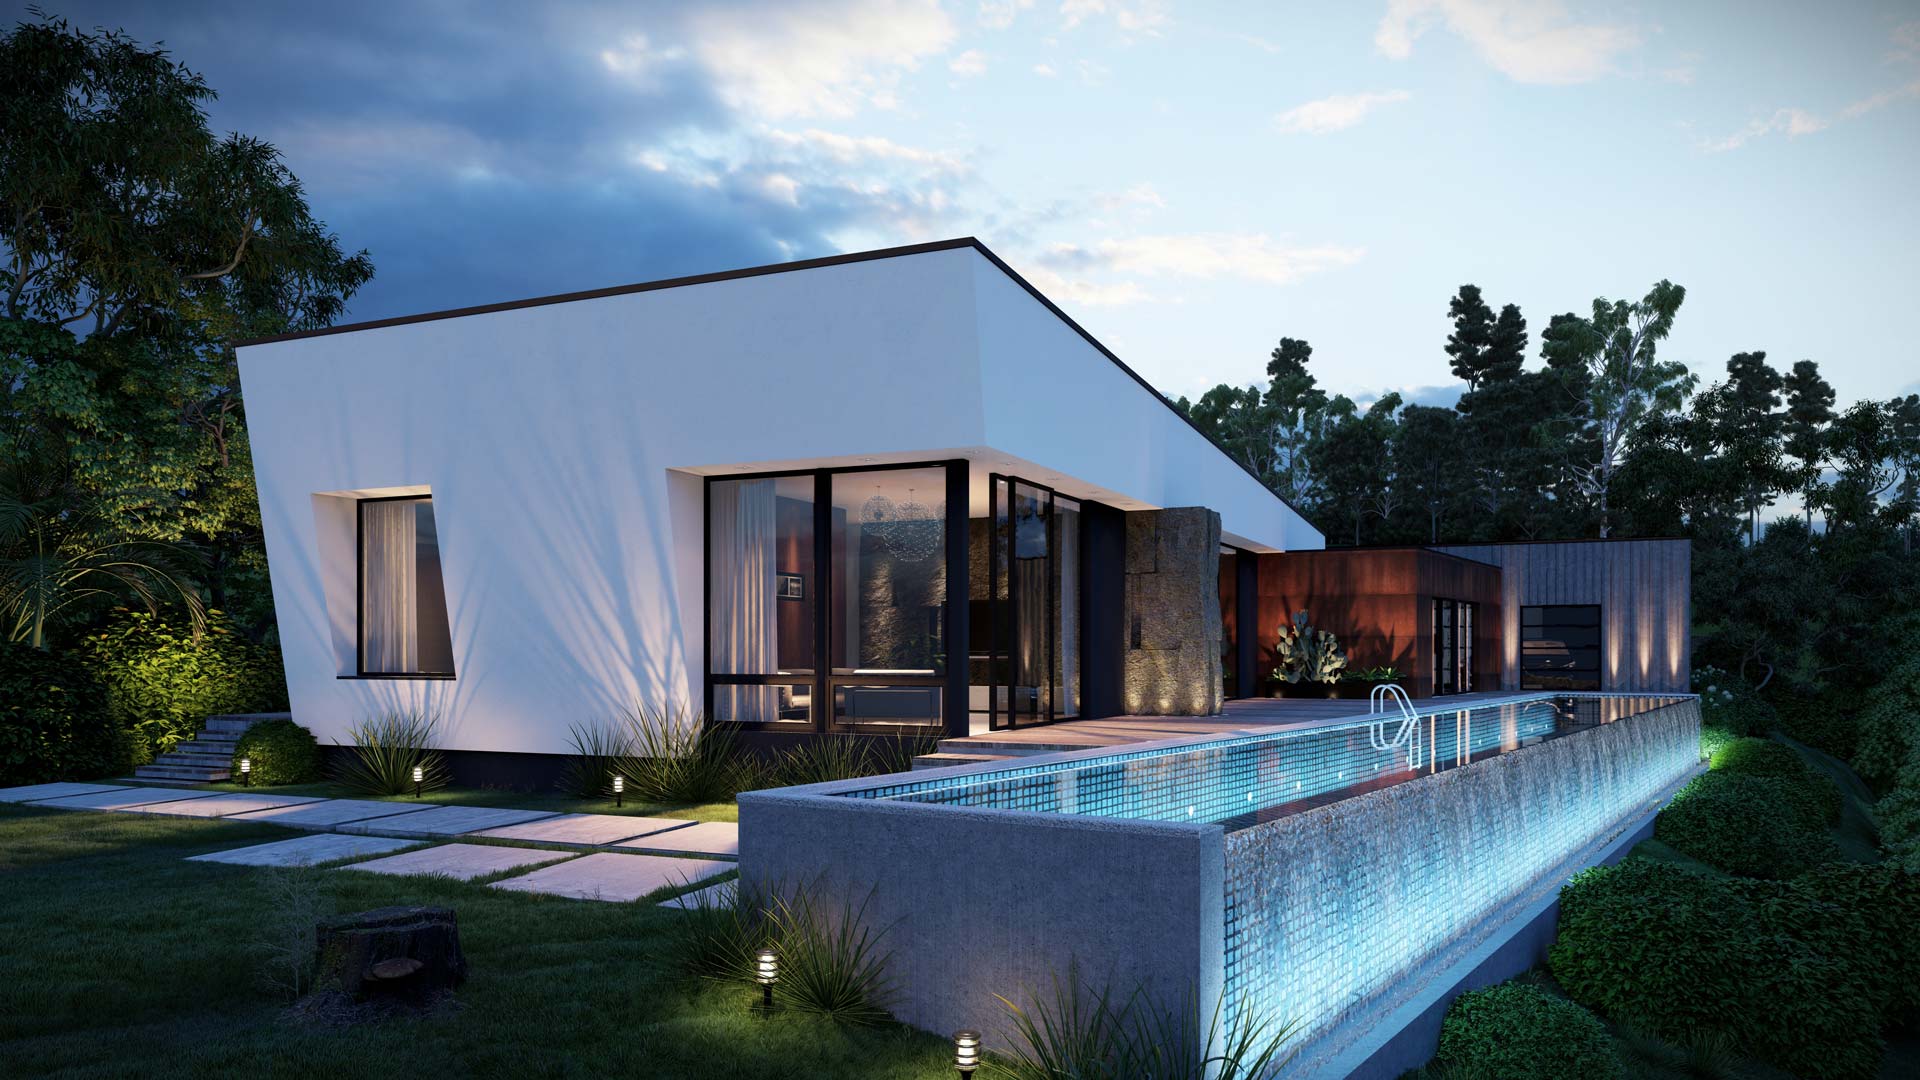 Meet the Company Behind Lumion Architectural Rendering Software